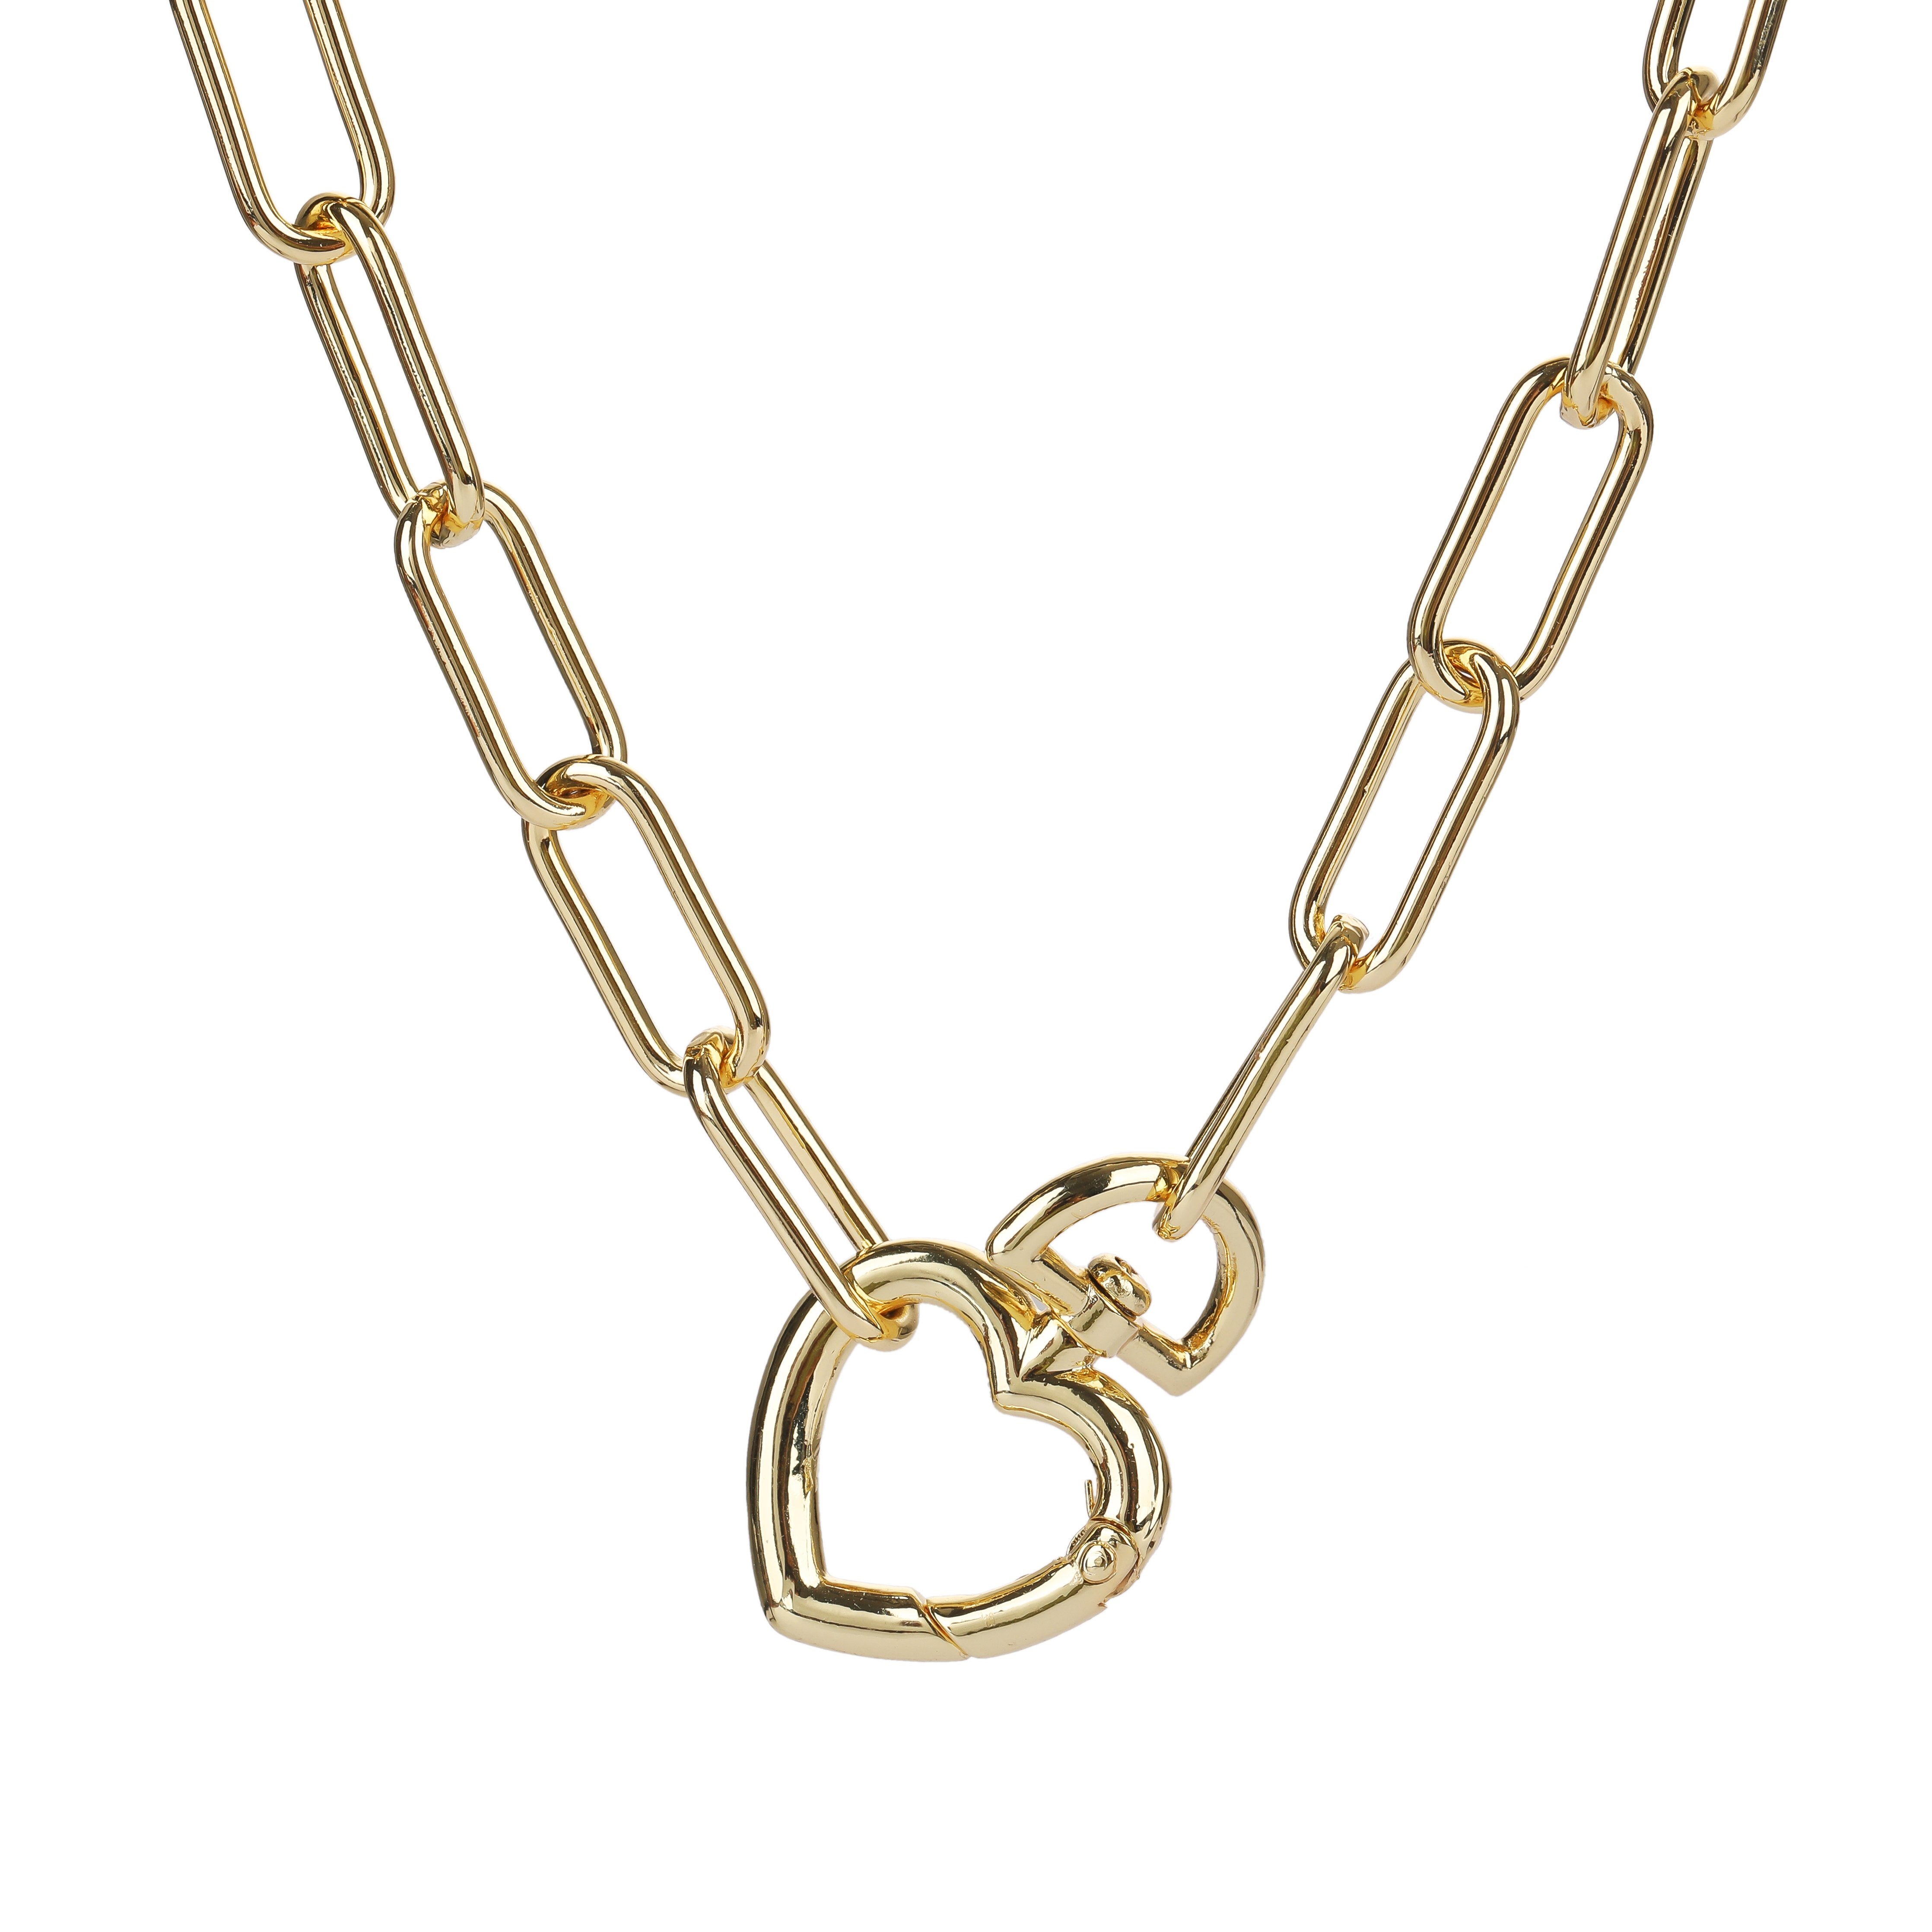 14k Gold Filled Lock Necklace, Toggle Clasp Necklace, Lock Charm